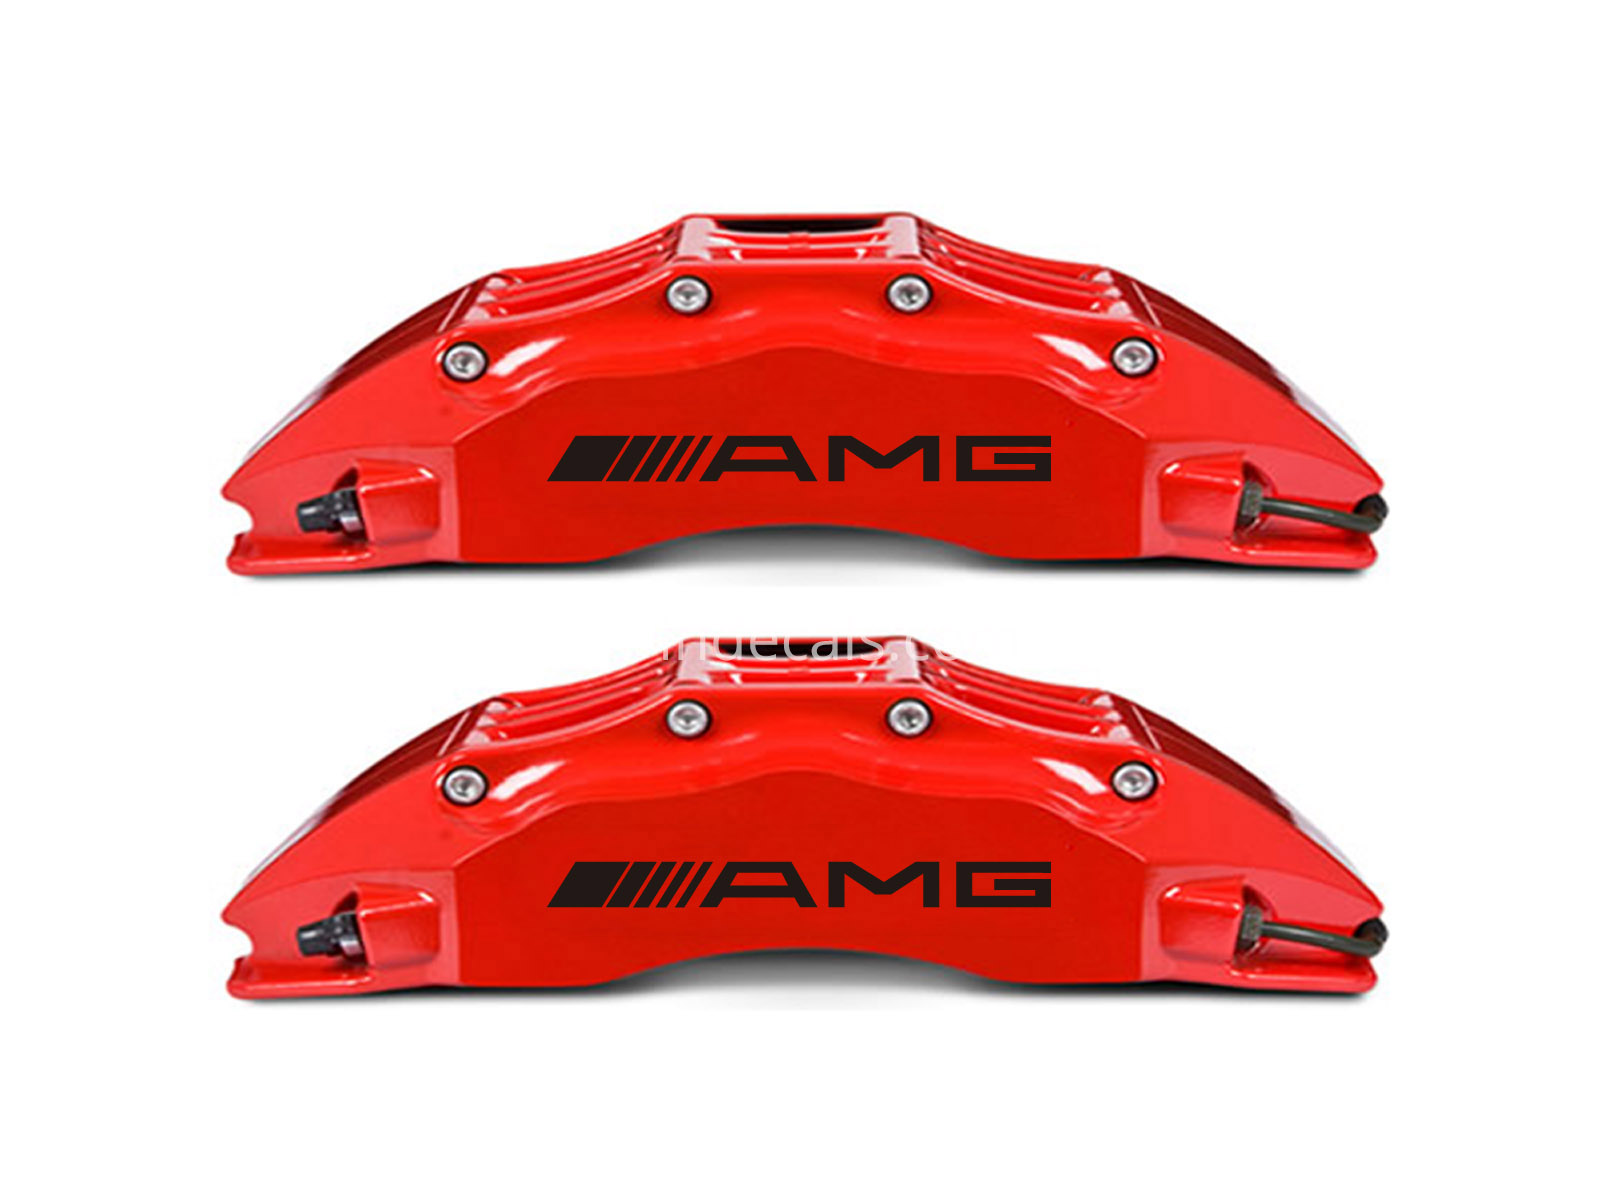 6 x AMG Stickers for Brakes - Black